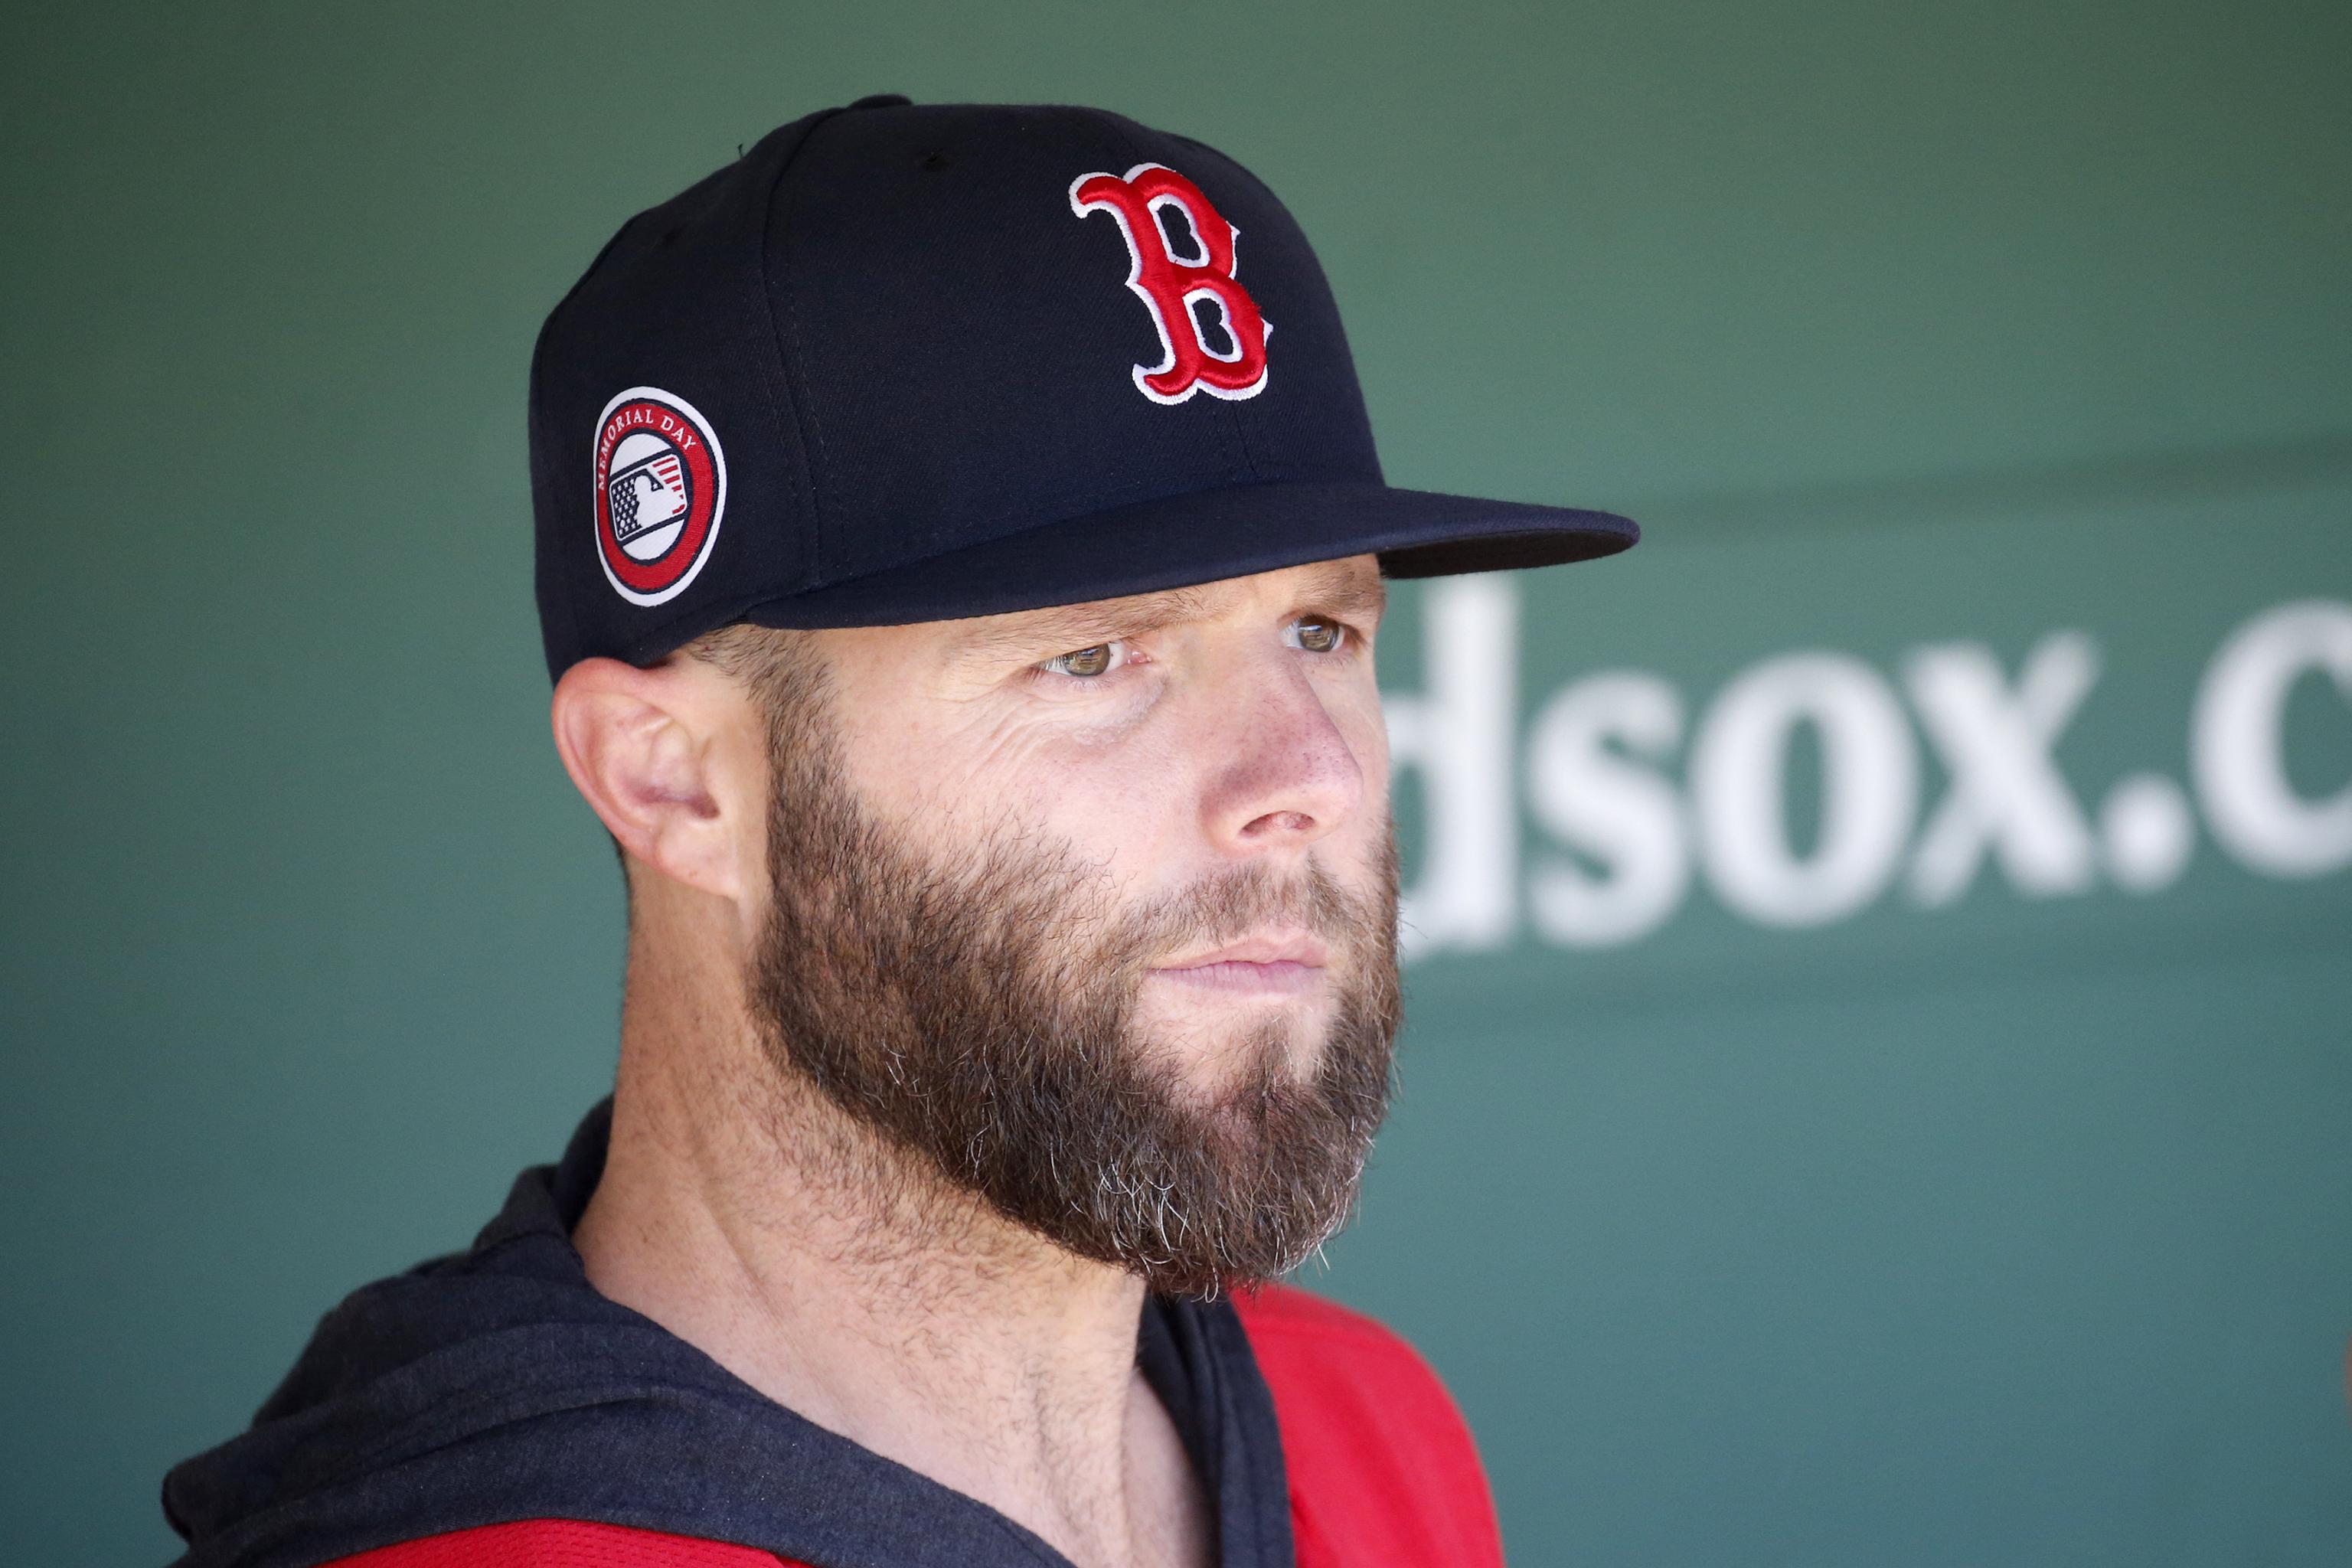 Red Sox Legend Dustin Pedroia Retires At 37 Years Old